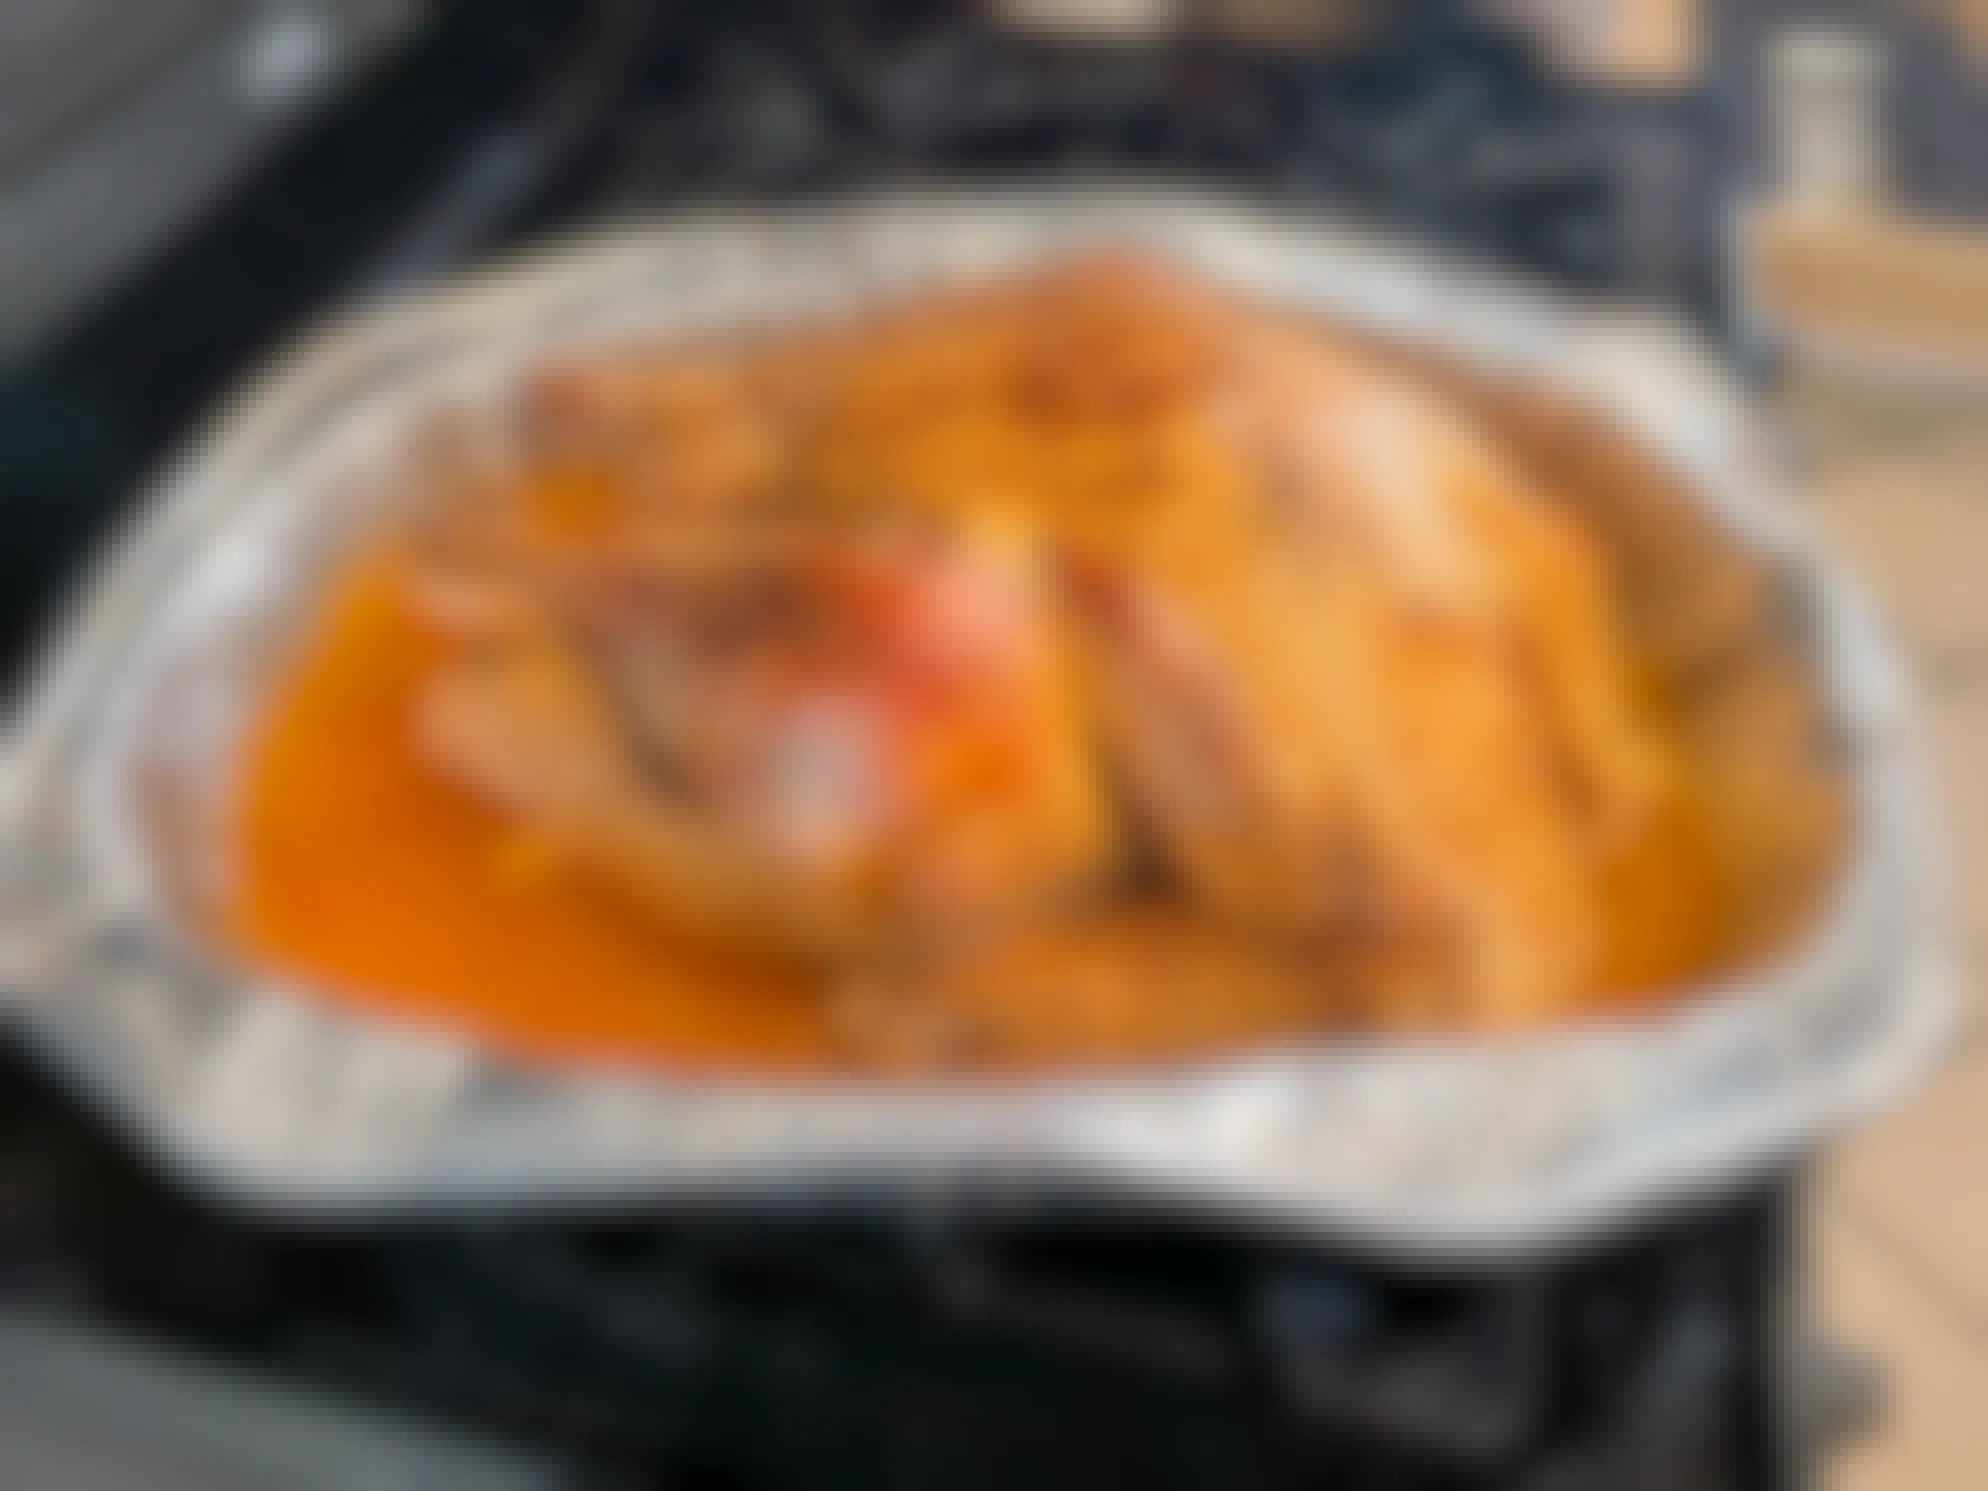 A cooked turkey in an aluminum baking dish, sitting on a stove.